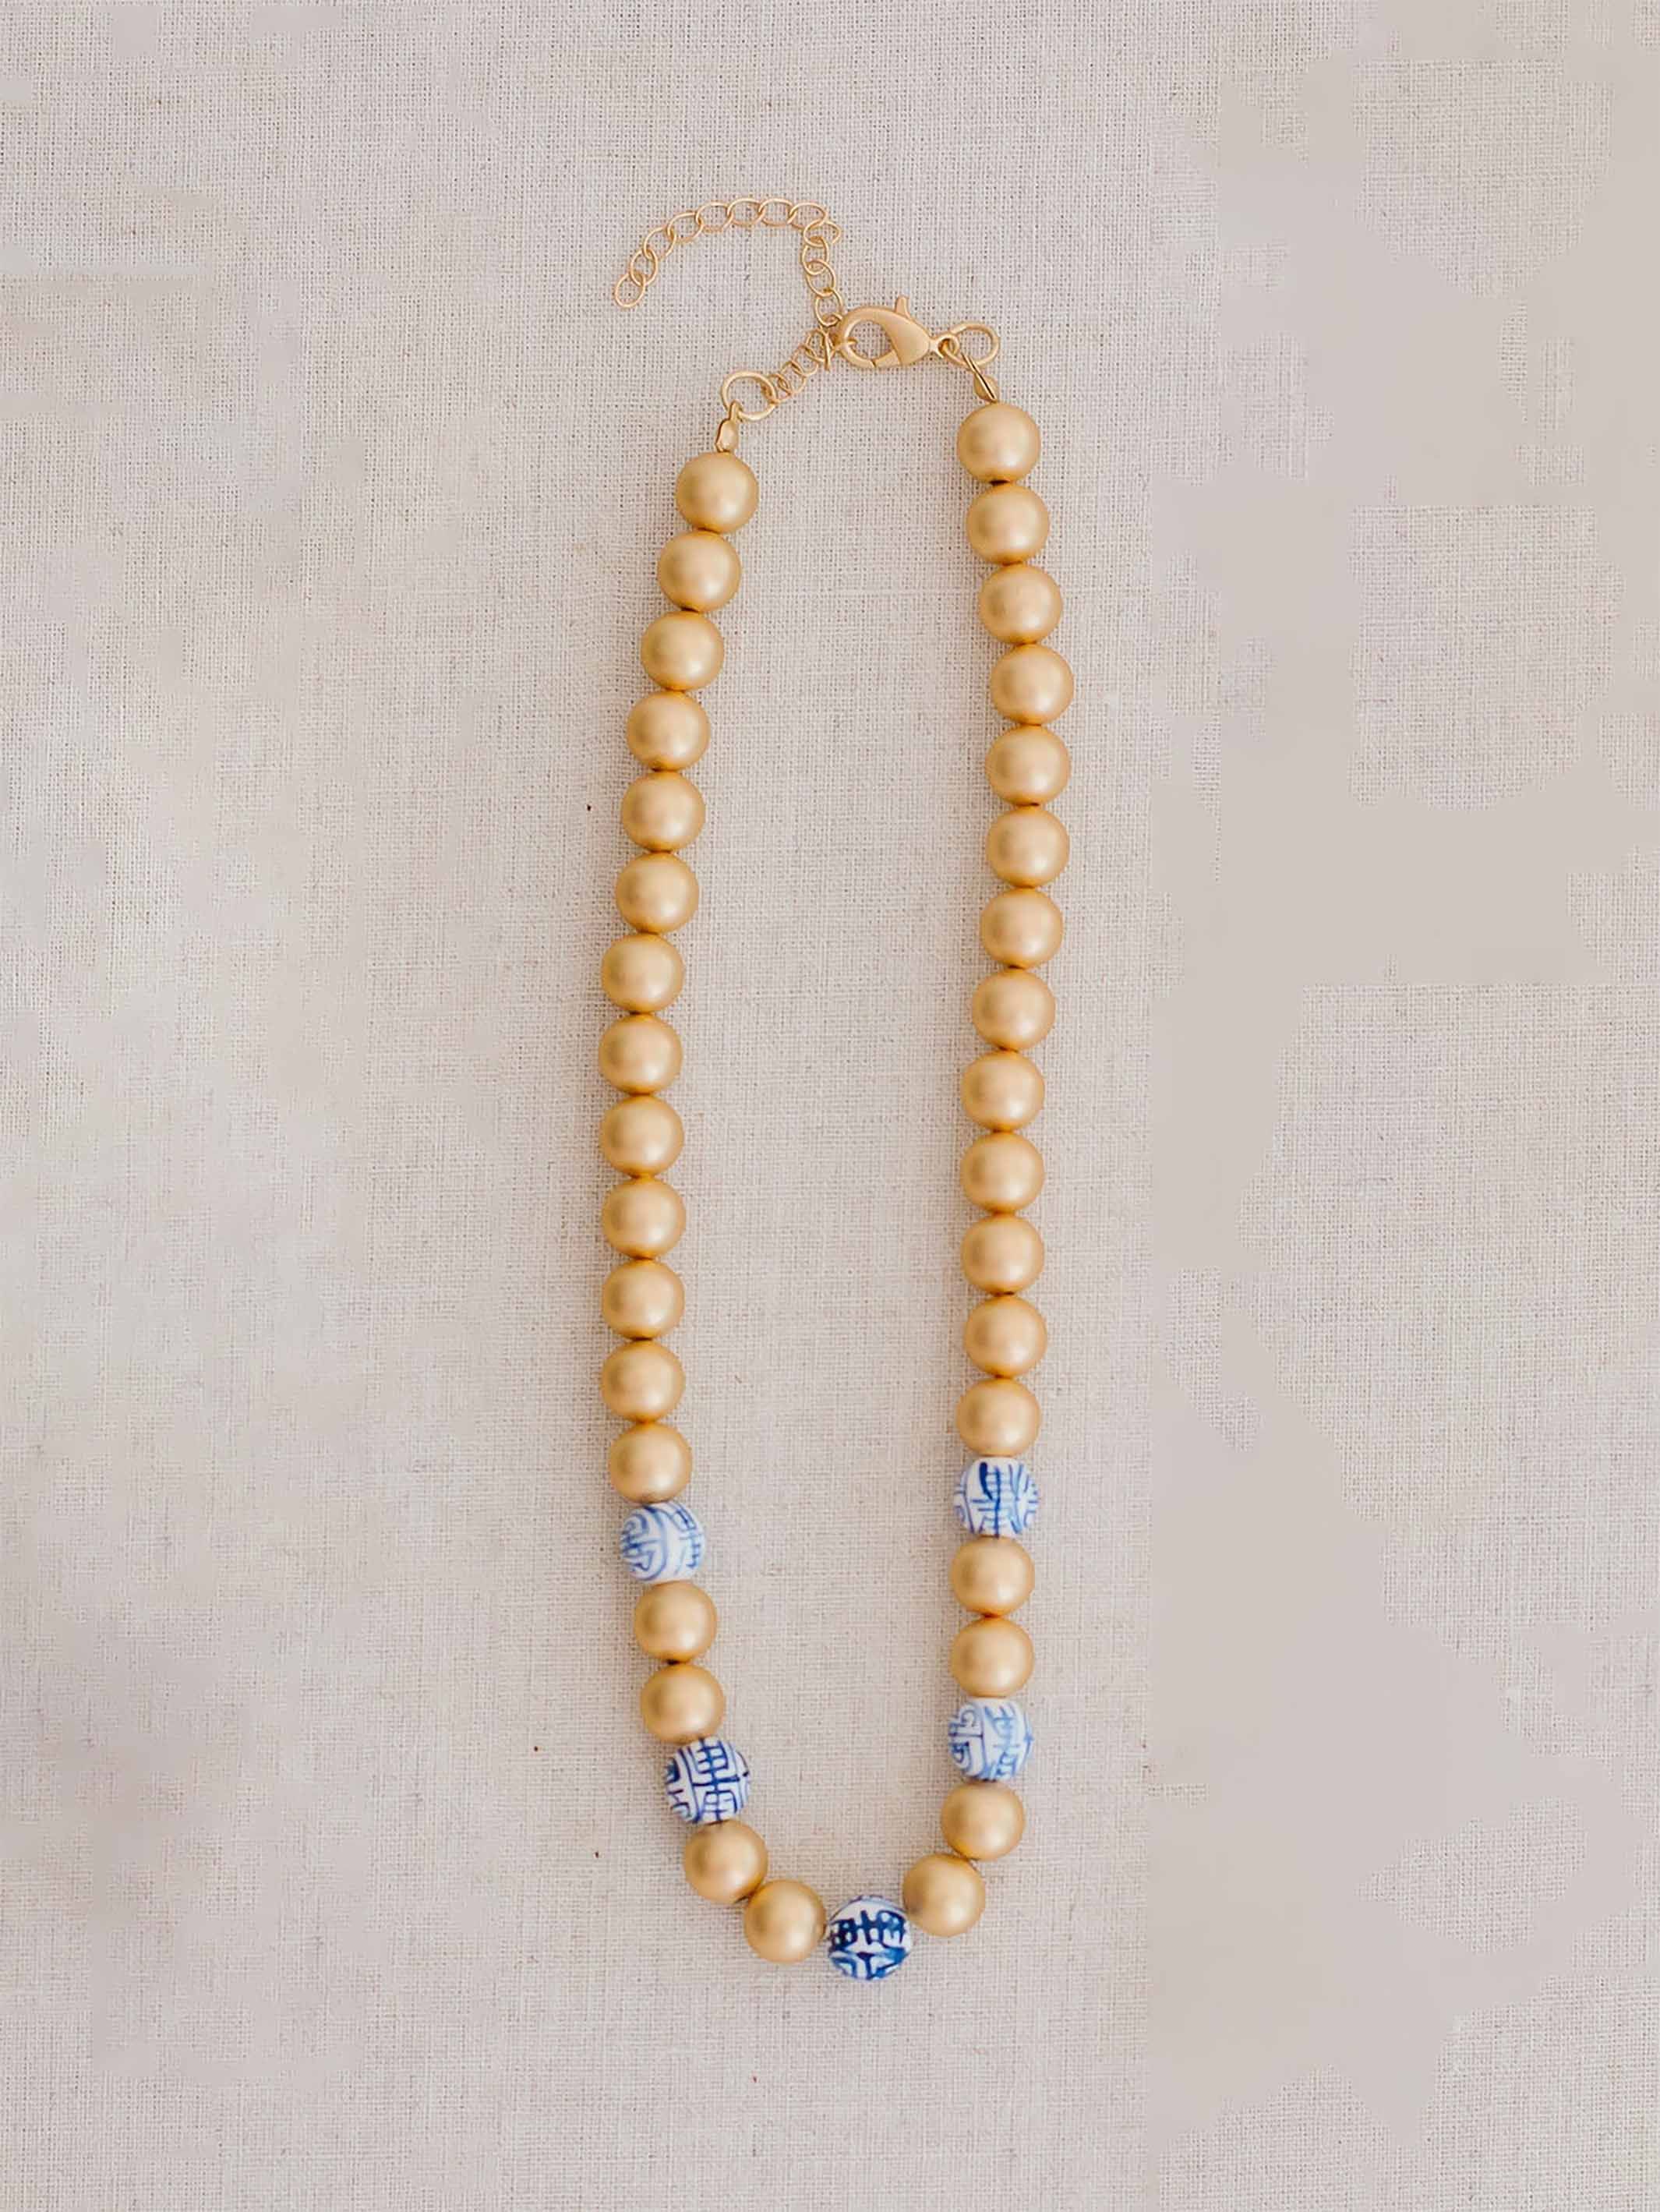 Beau Necklace | Michelle McDowell